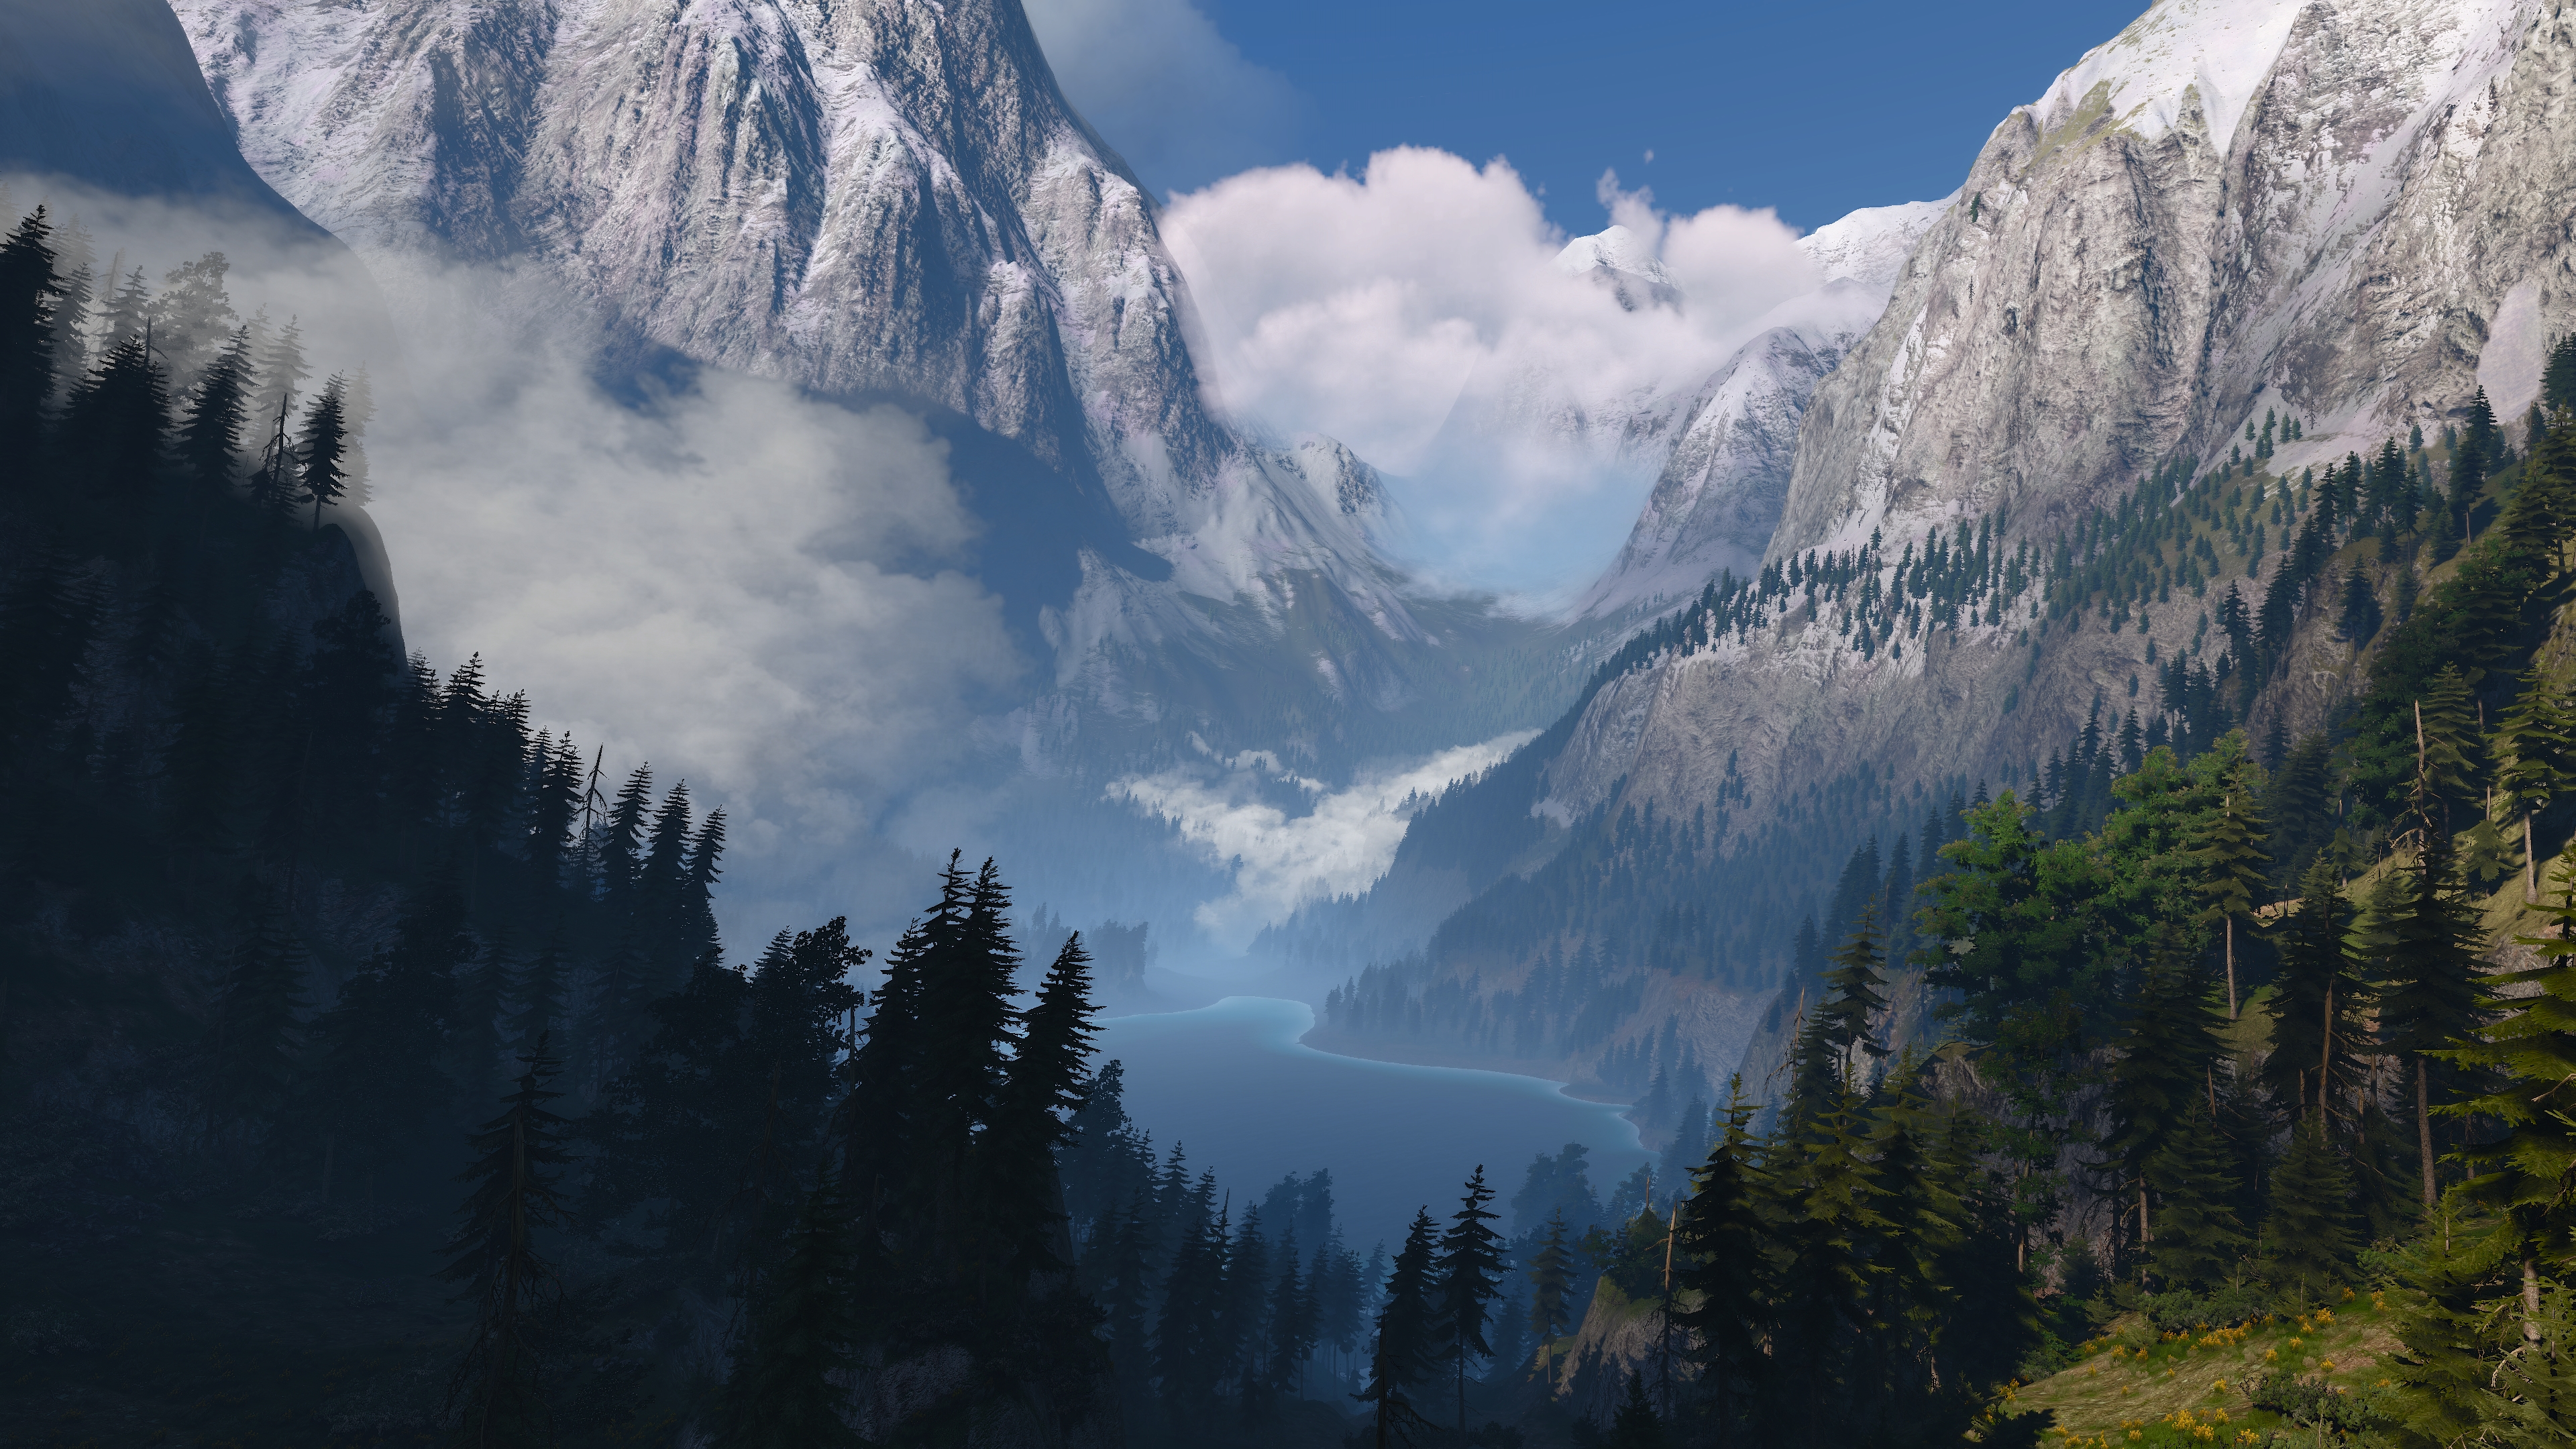 General 3840x2160 The Witcher 3: Wild Hunt screen shot PC gaming Kaer Morhen video games video game art digital art mountains water lake trees clouds sky forest CGI nature snow